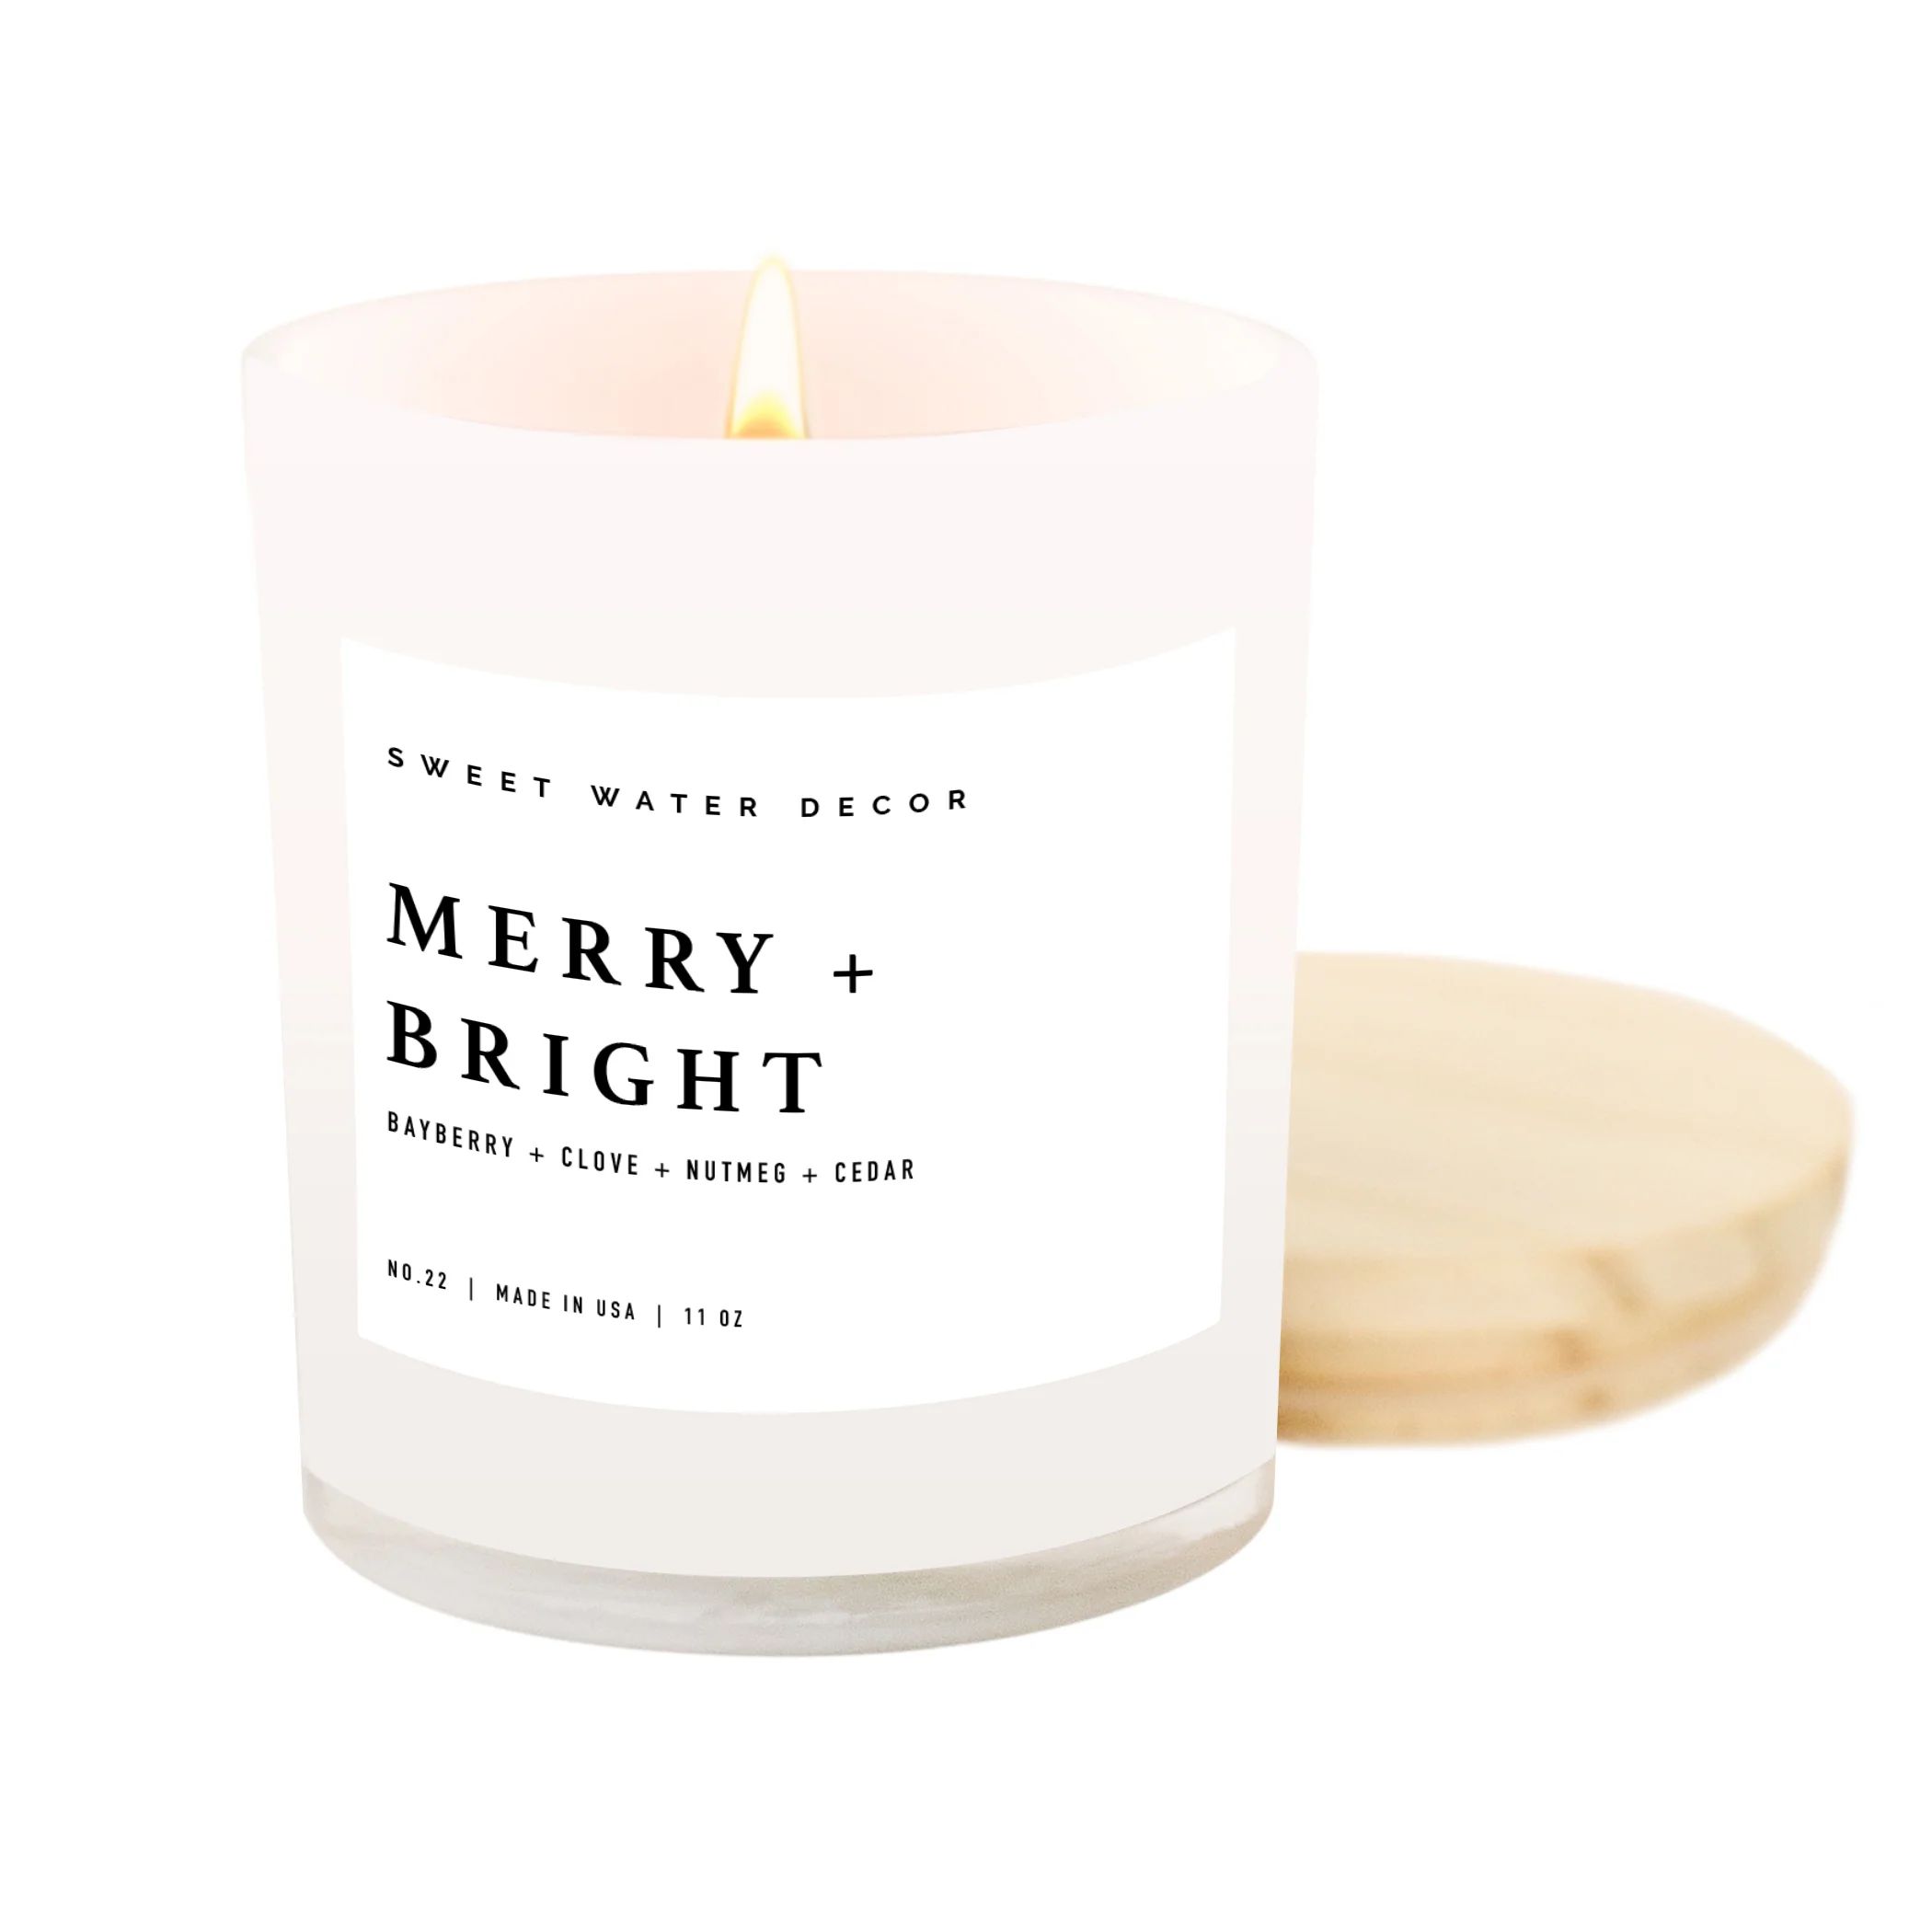 Merry + Bright Soy Candle - White Jar - 11 oz | Sweet Water Decor, LLC